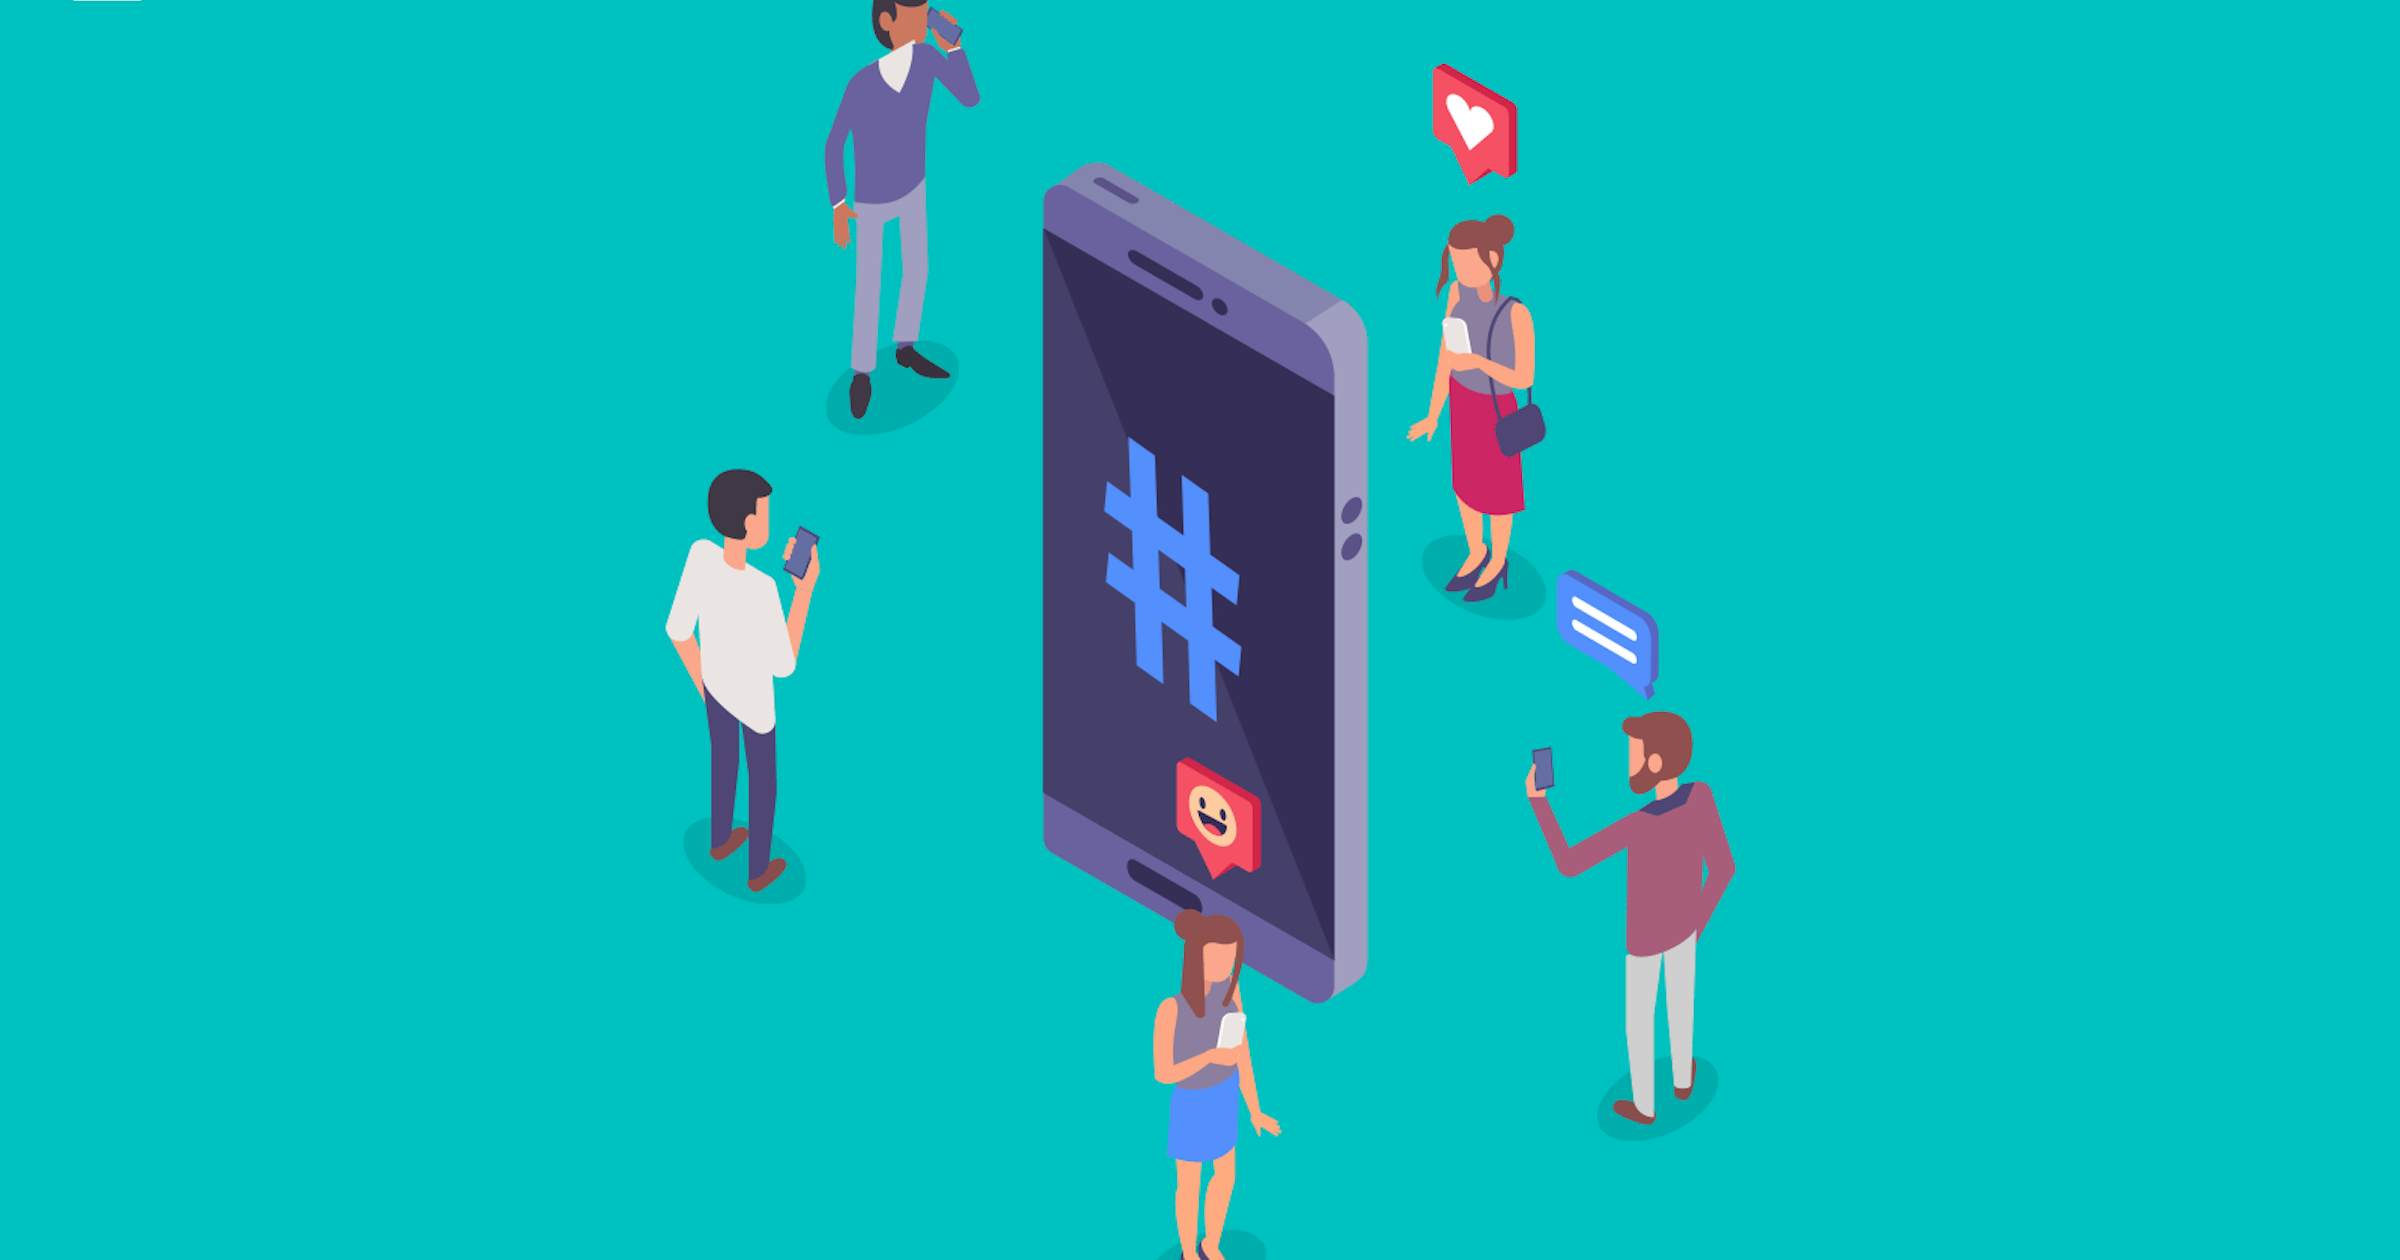 Increase Reach With Instagram Hashtags | Digital Marketing Institute